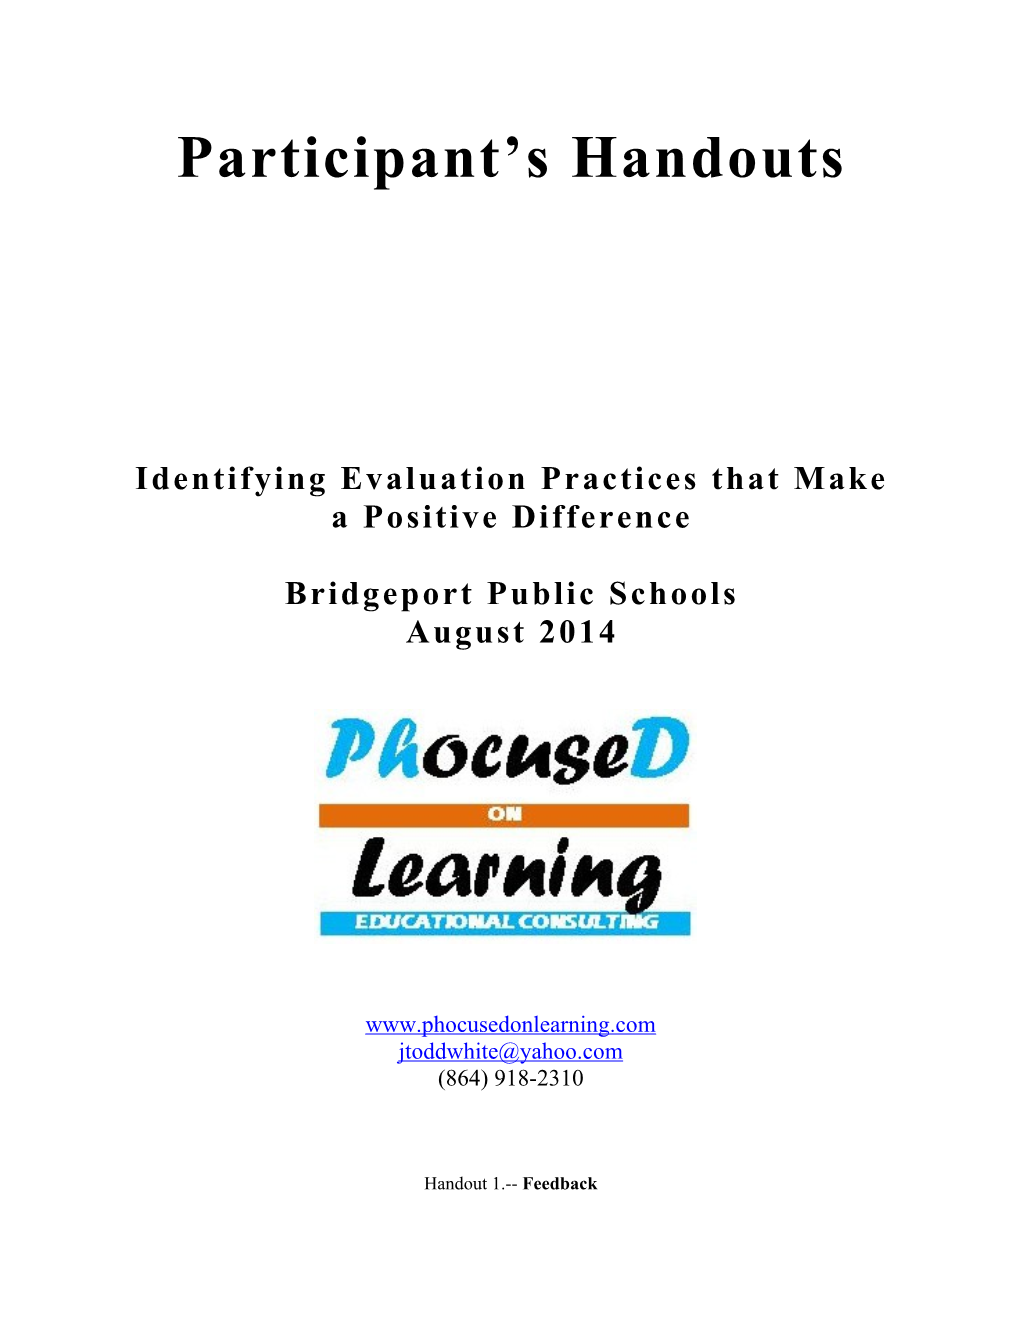 Identifying Evaluation Practices That Make a Positive Difference